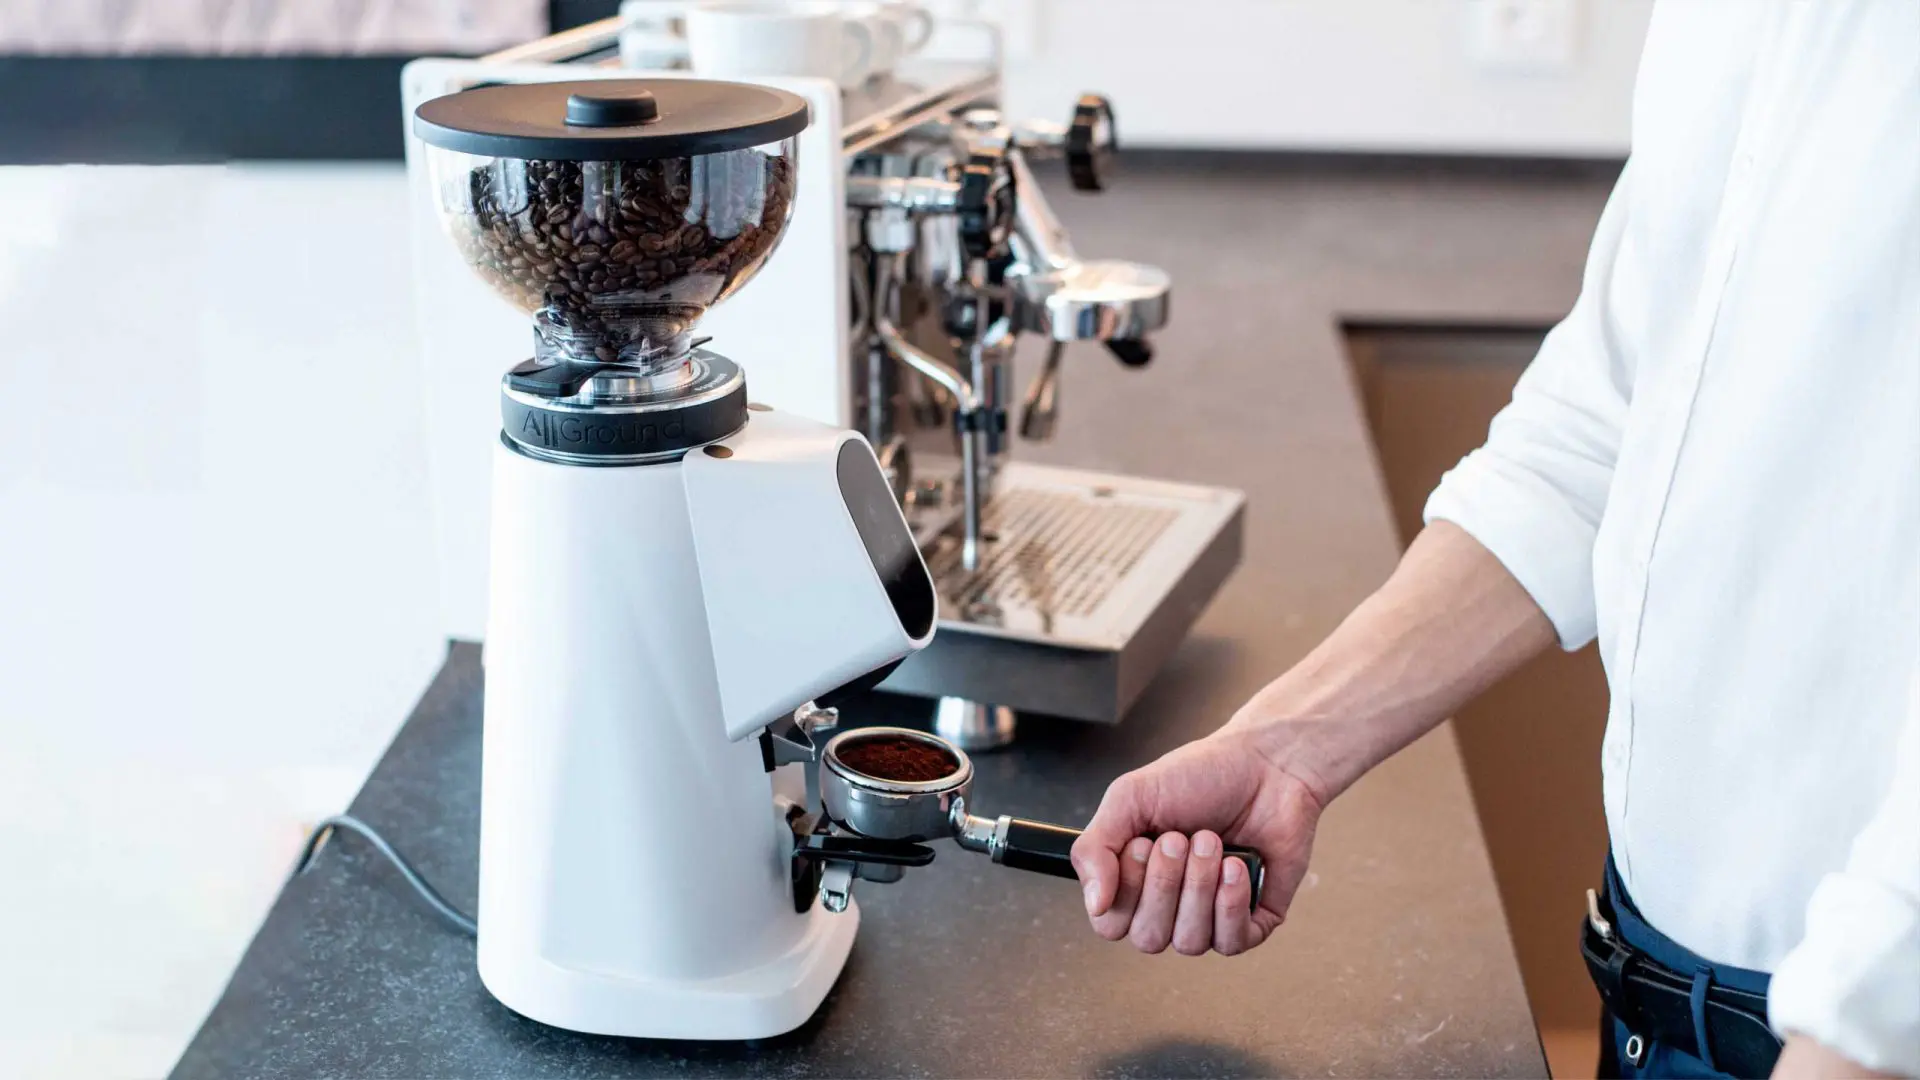 Introducing AllGround coffee grinder by Fiorenzato, for the perfect cup of coffee